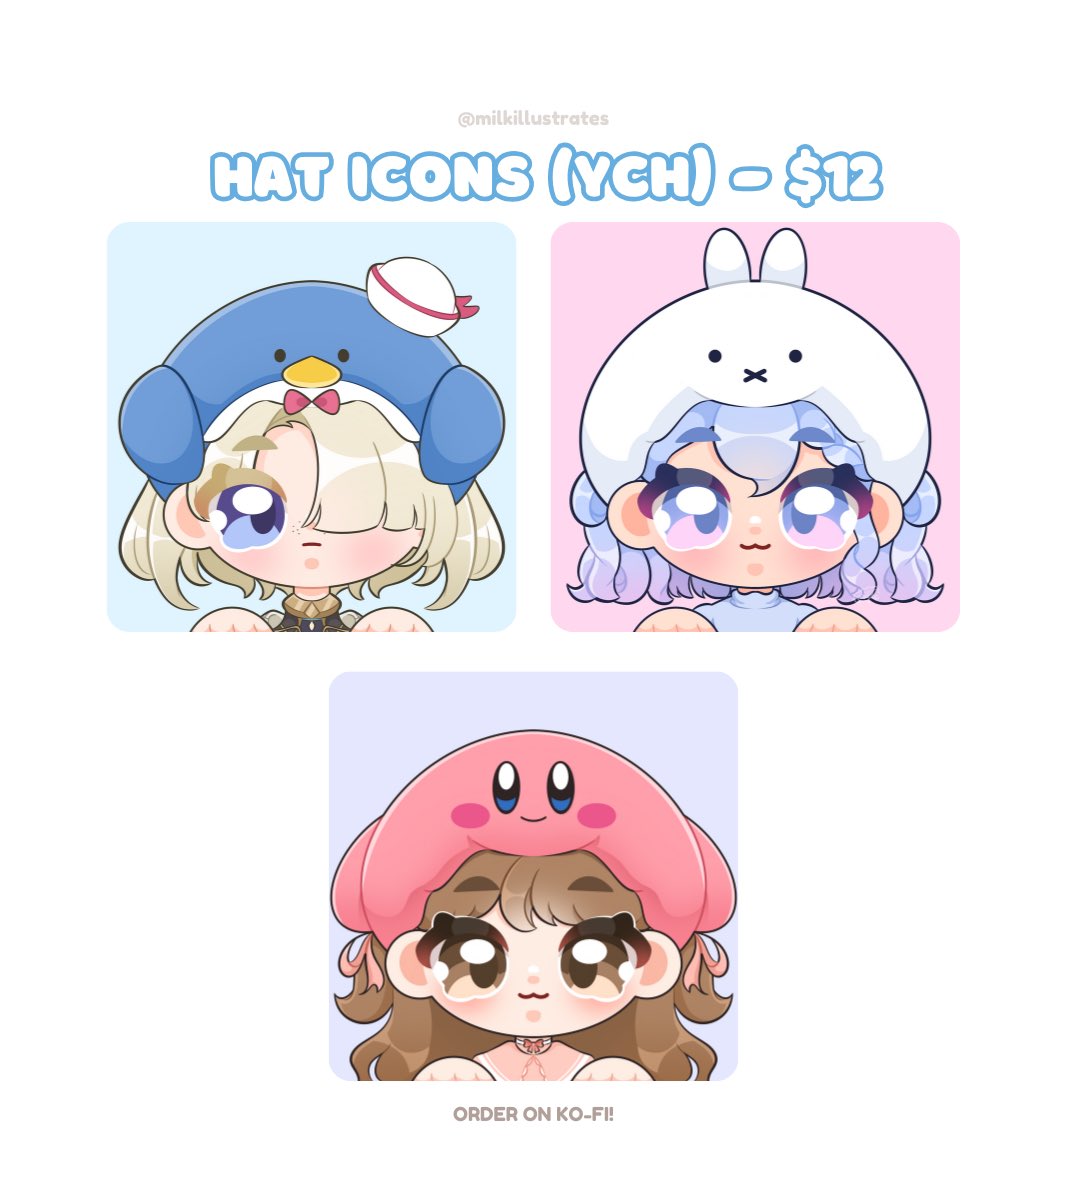 my character-themed hat icons are now open ₍ᐢ. .ᐢ₎ 

there’s also an option on my page if you’d like to use it as a pngtuber for streams :) 

pls order through my ko-fi if you’re interested! link below <3 thank you so much! #commsopen